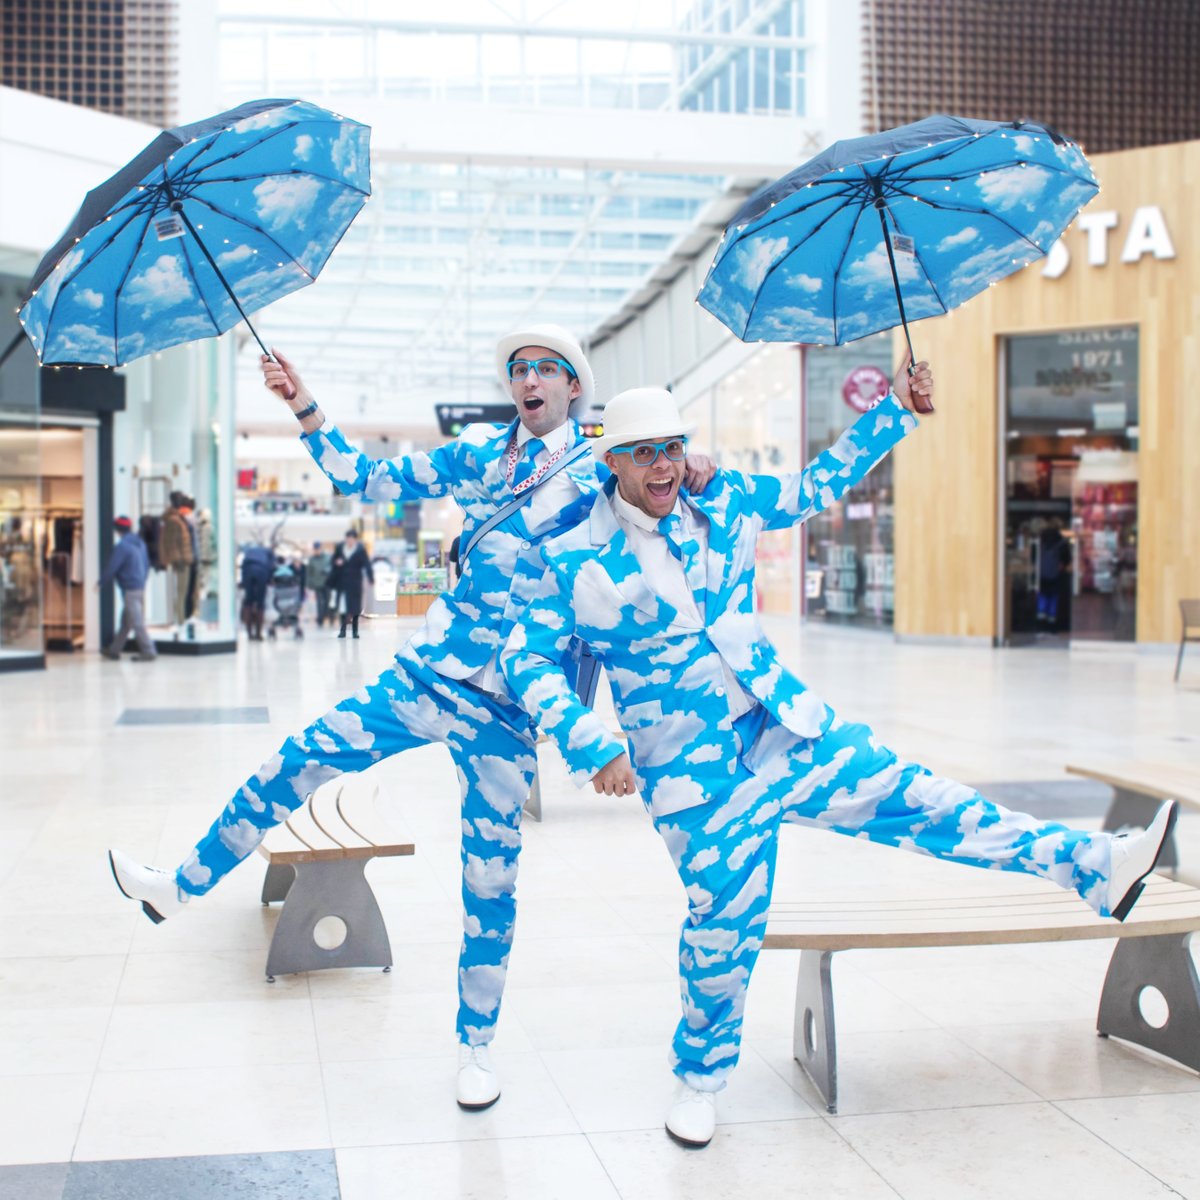 This Saturday 17th Feb we say hello to the Blue Sky thinkers! They will be on site from 11AM till 4PM to celebrate #RandomActsofKindnessDay